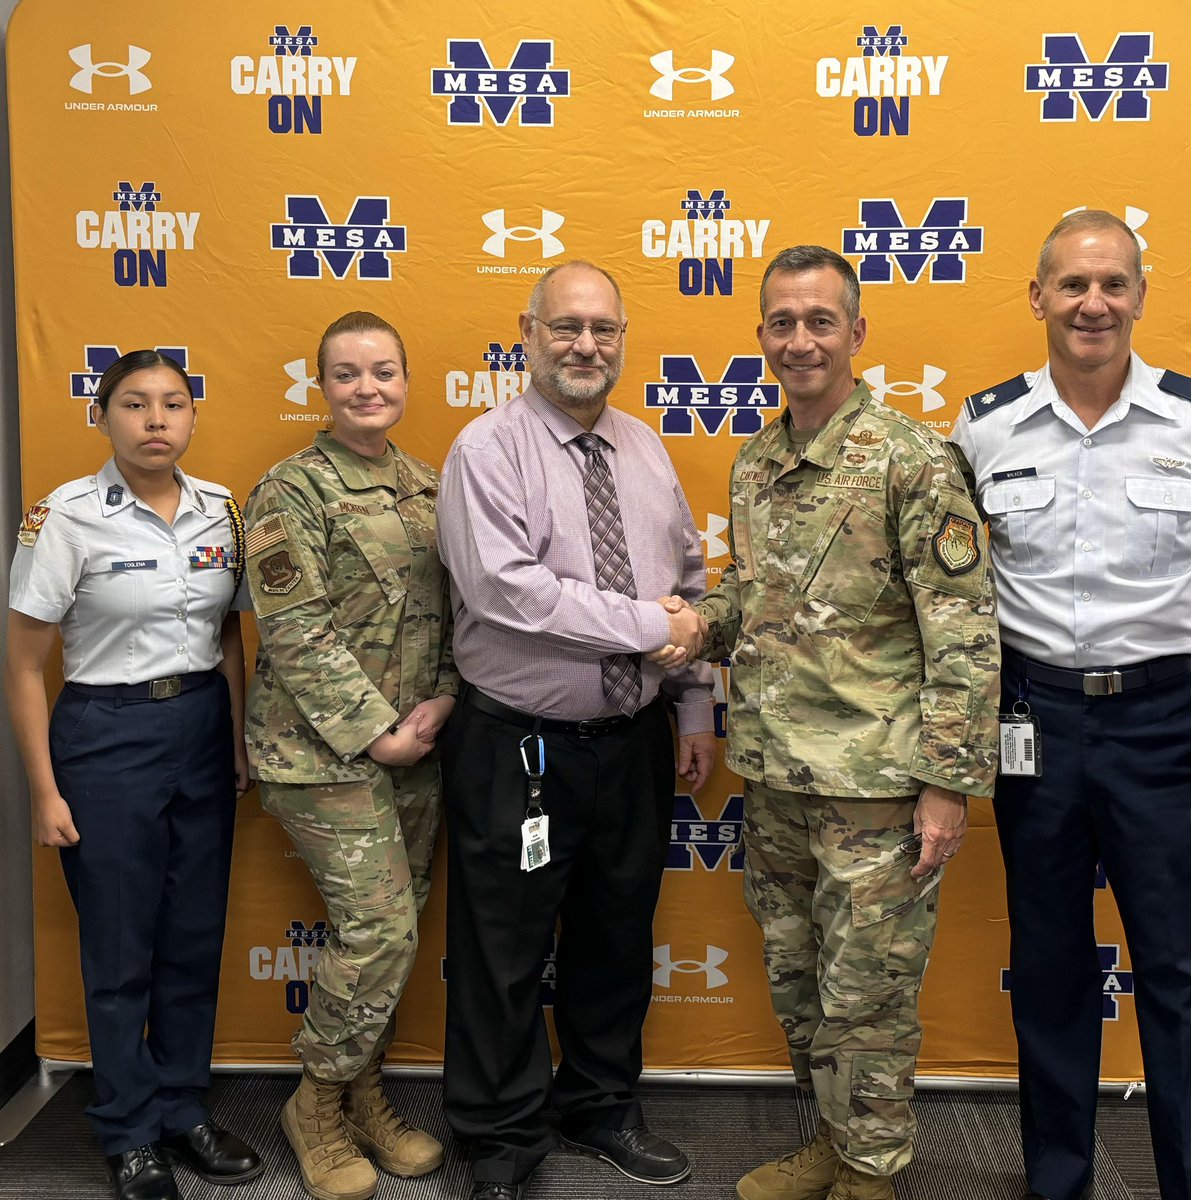 We had General Cantwell and Command Chief McKeen on campus today visiting Jackrabbit ROTC. It was truly an honor. CarryOn! @AirForceTimes @usafrotc @mpsaz @MesaHSathletics @EubanksAD